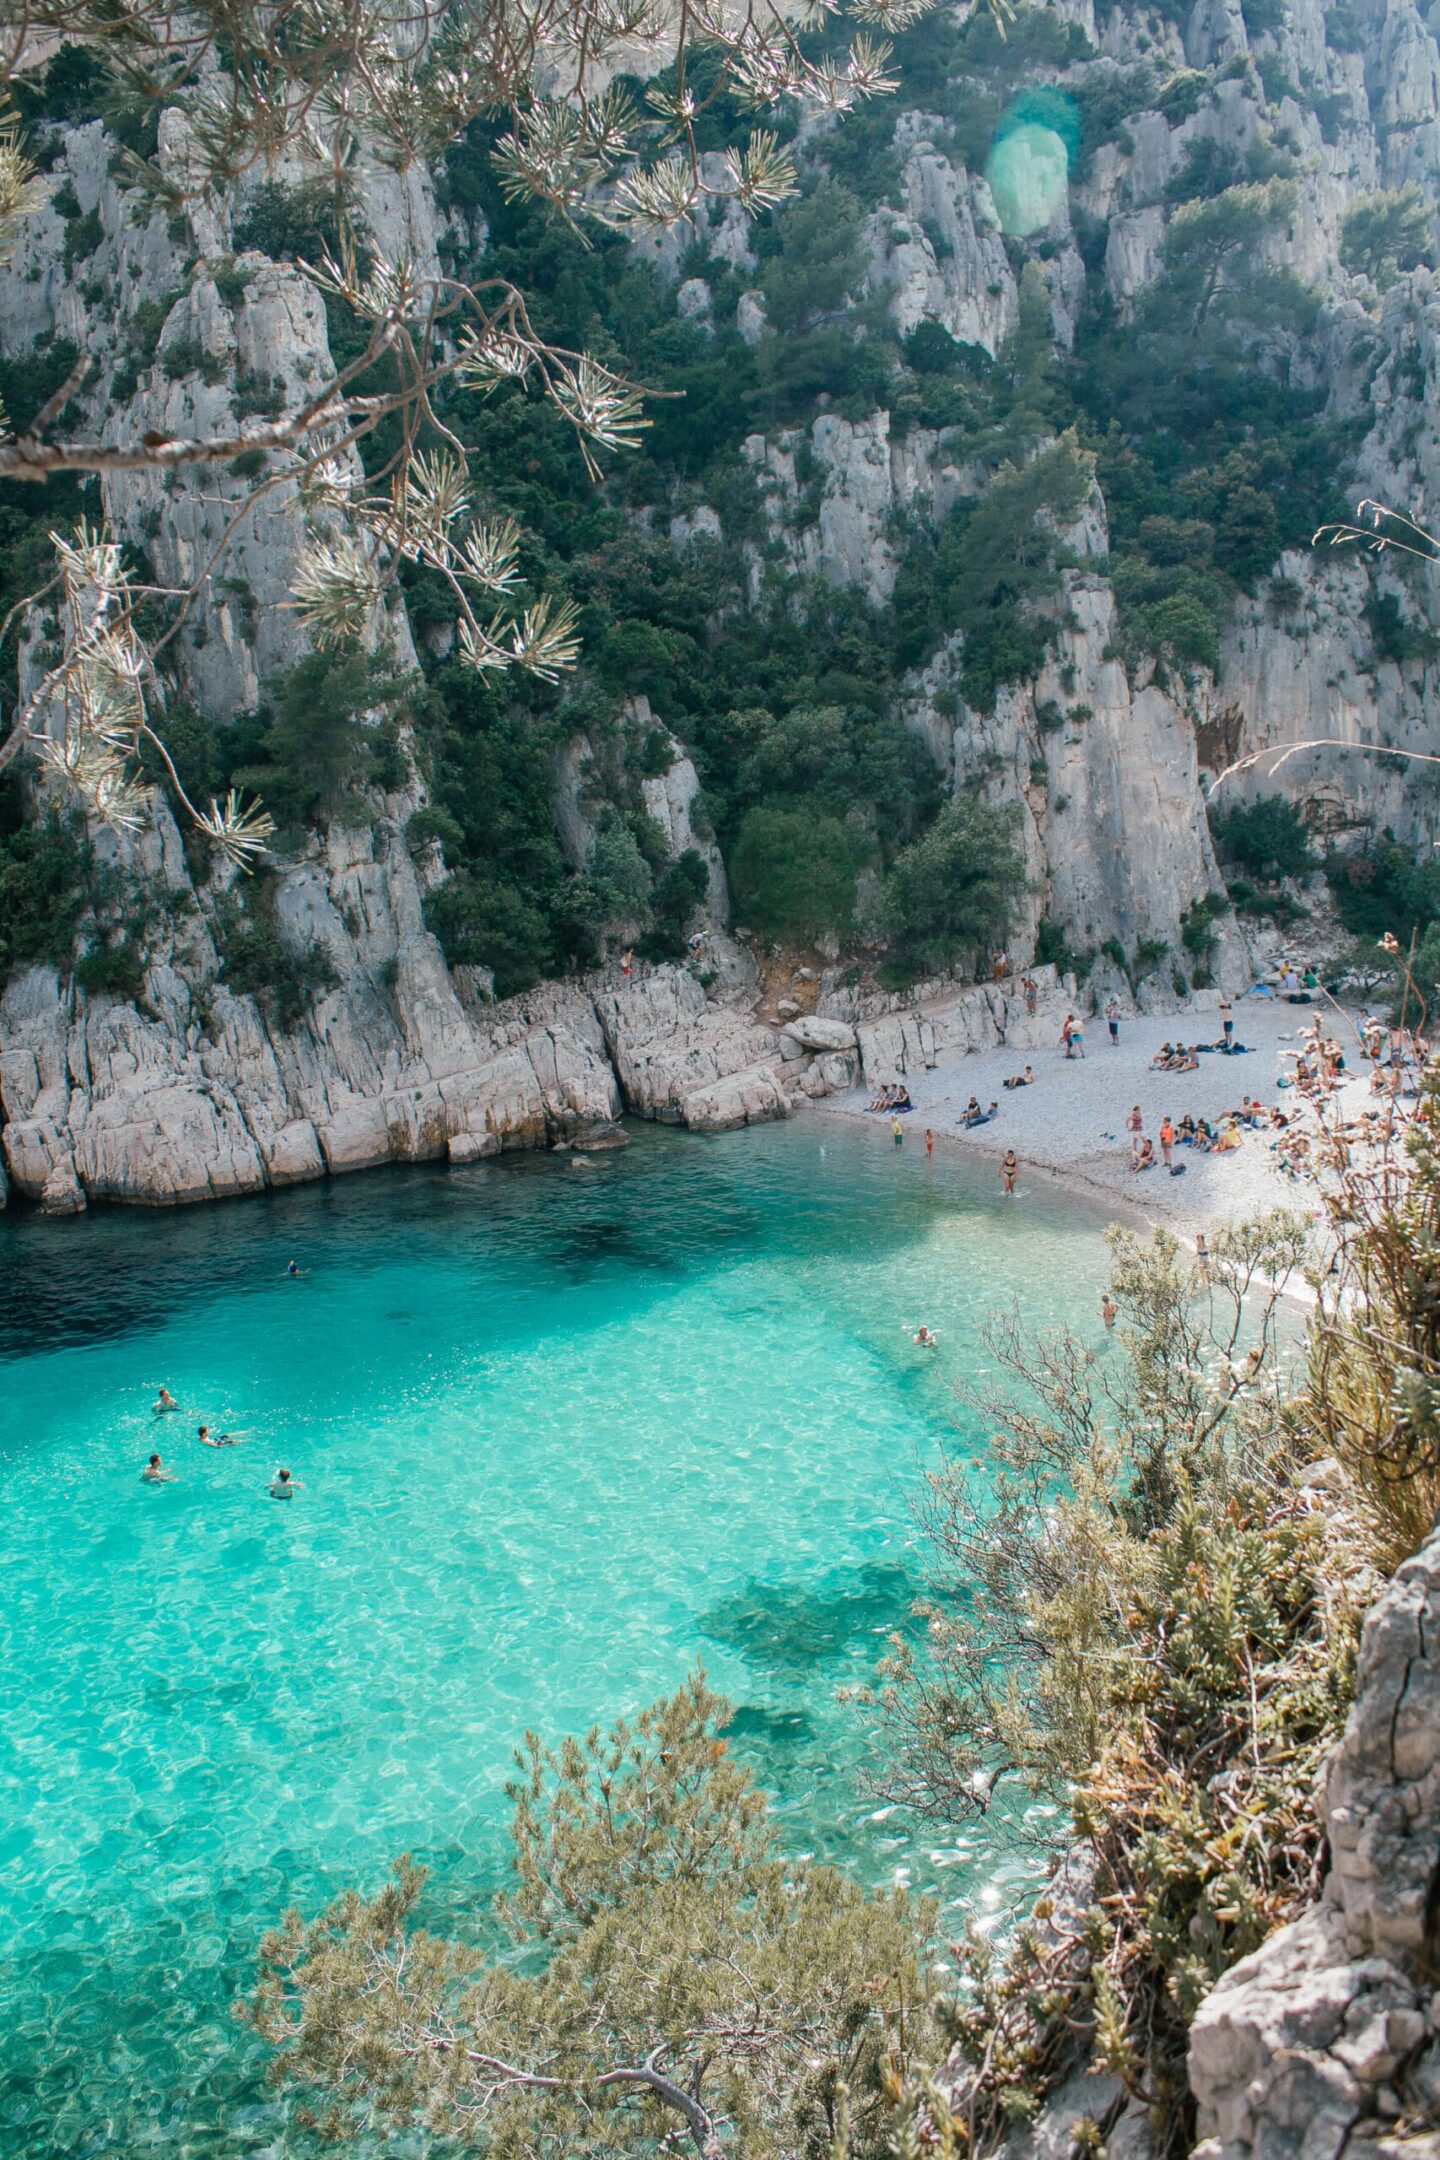 Looking down at the clear blue water at Calanque d’En Vau beach in Calanques National Park